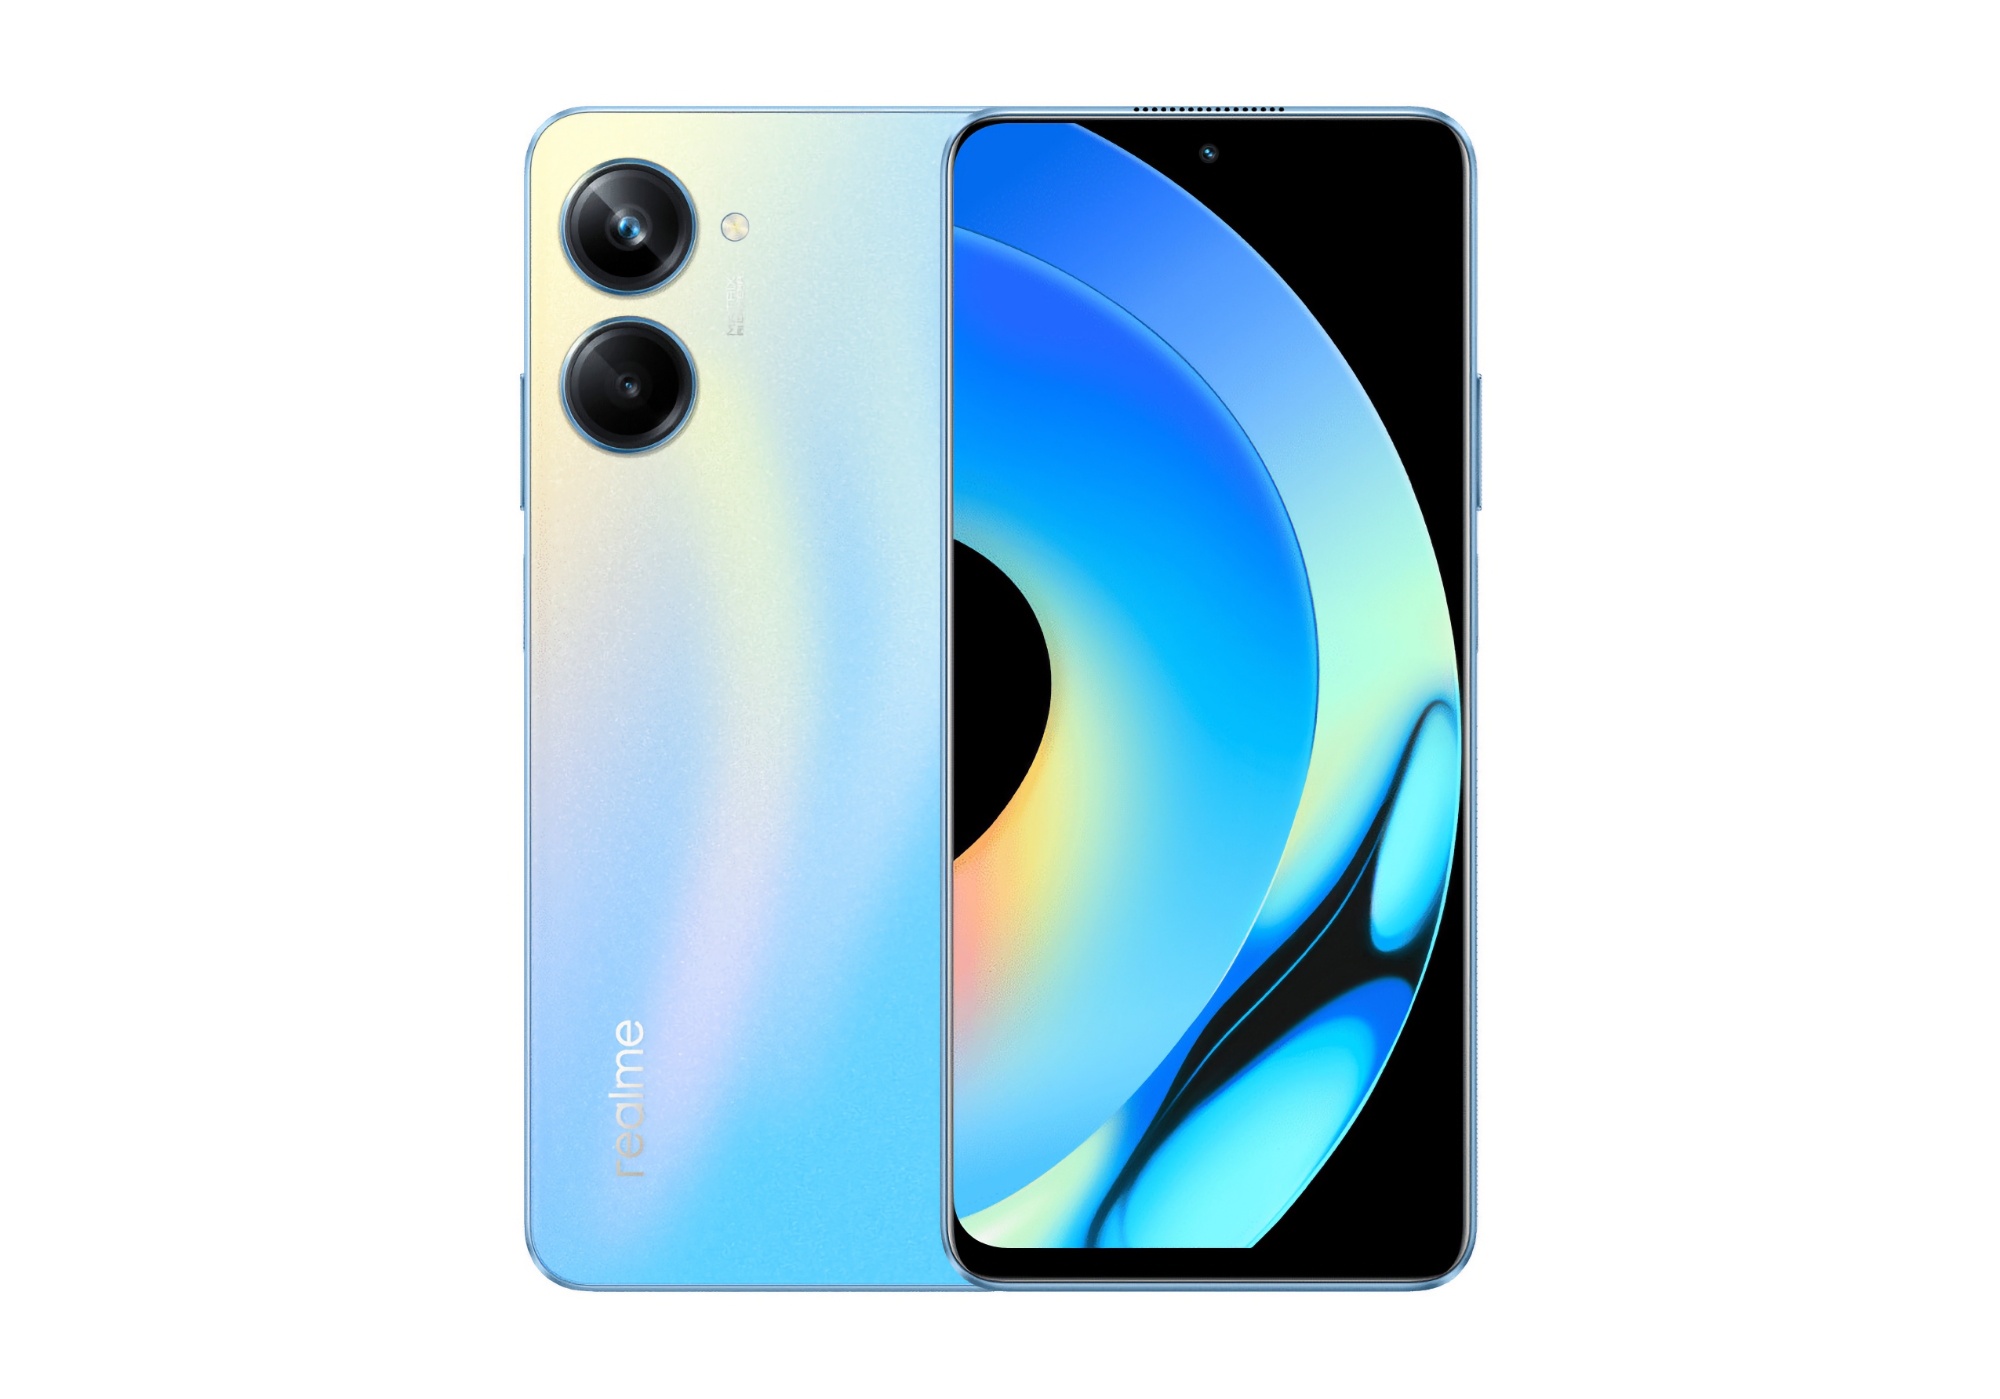 realme has announced Android 14 testing programme with realme UI 5.0 for realme 10 Pro 5G smartphone